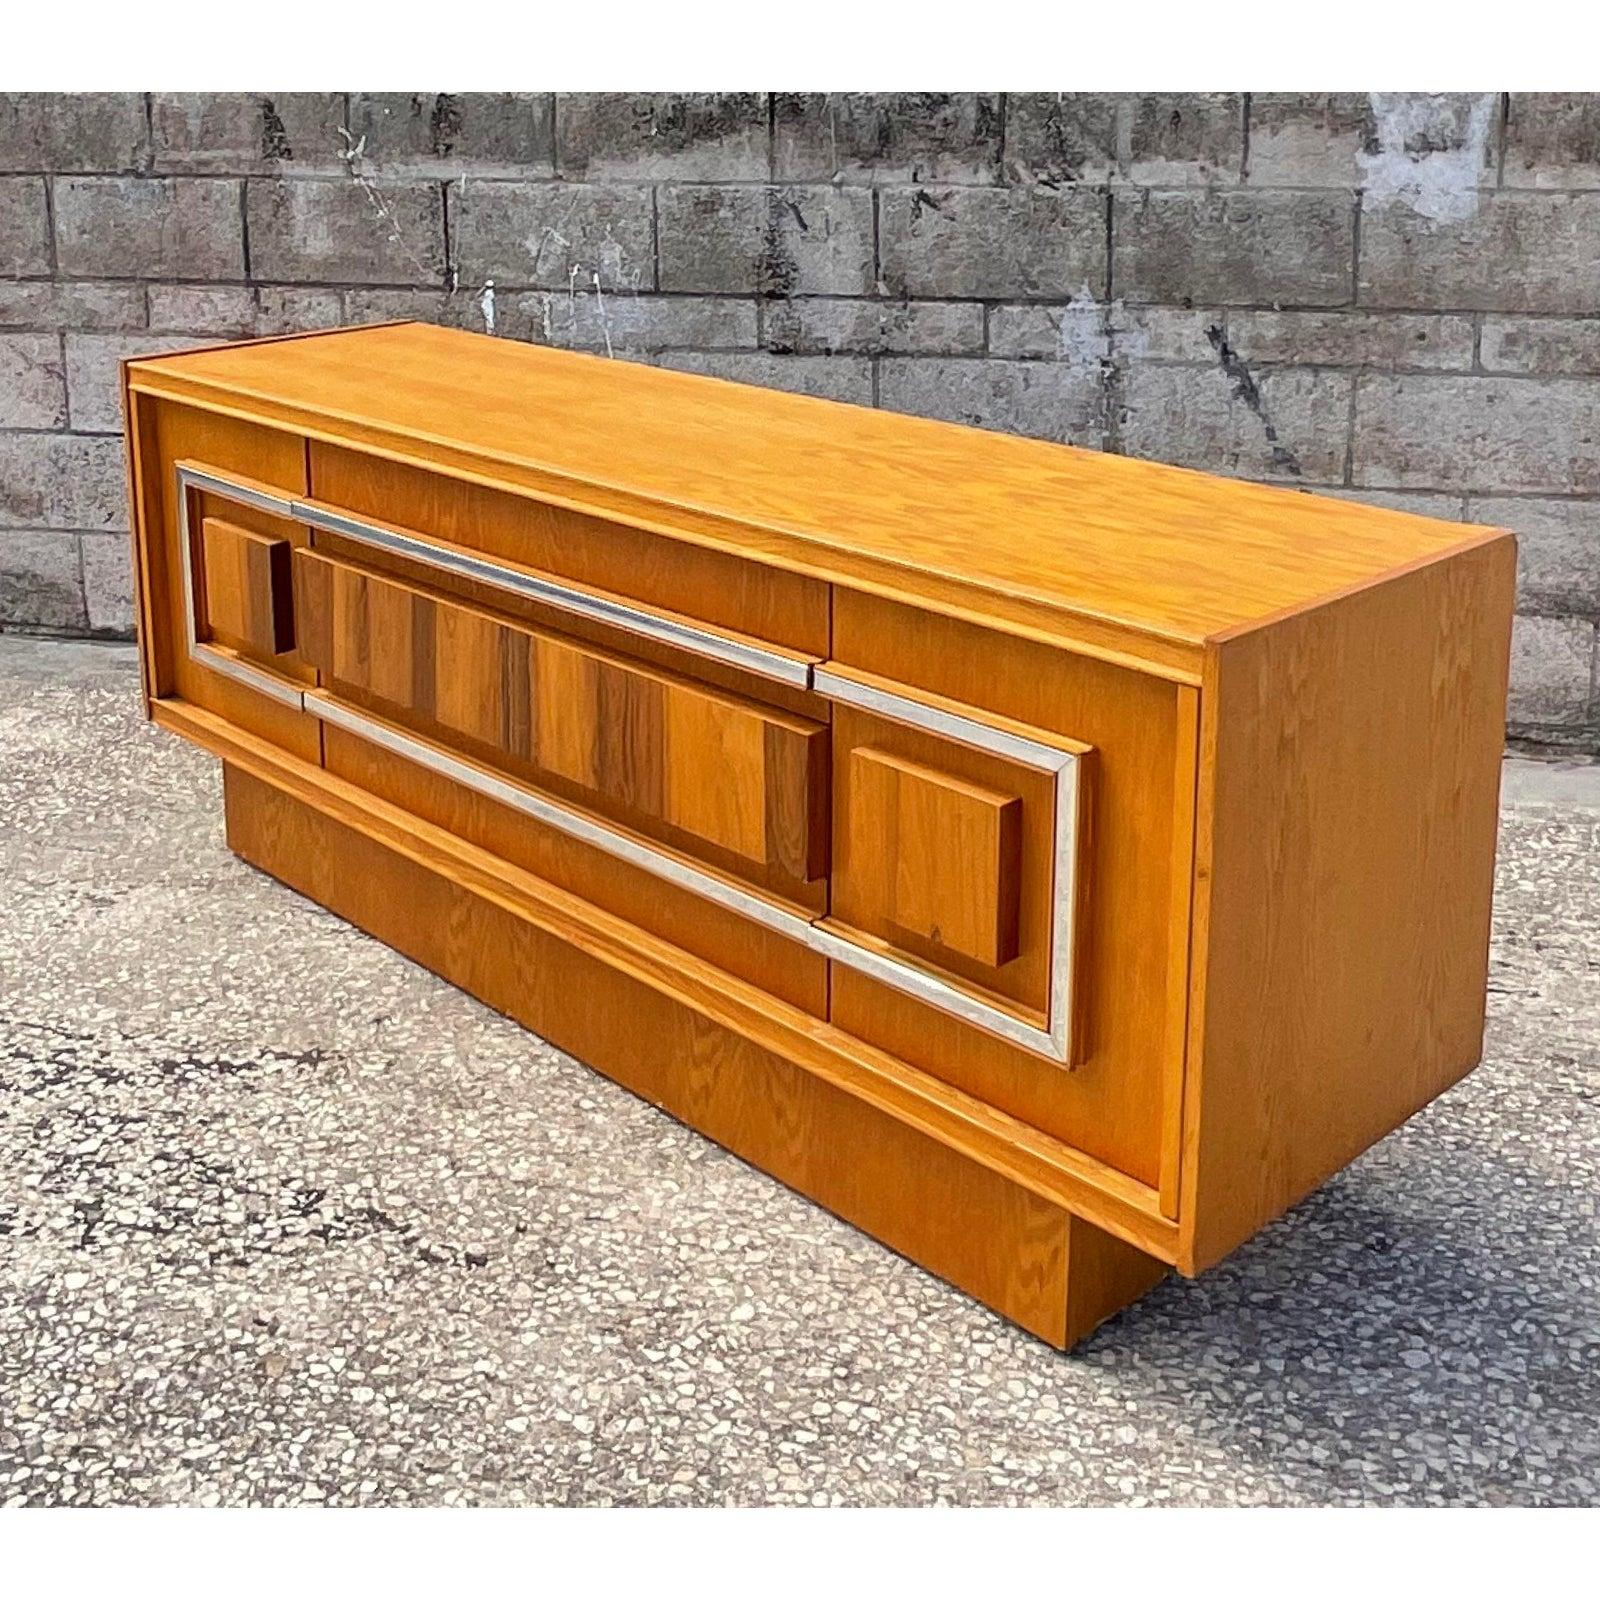 20th Century Vintage Mid-Century Modern Inset Wood Grain Panel Credenza For Sale